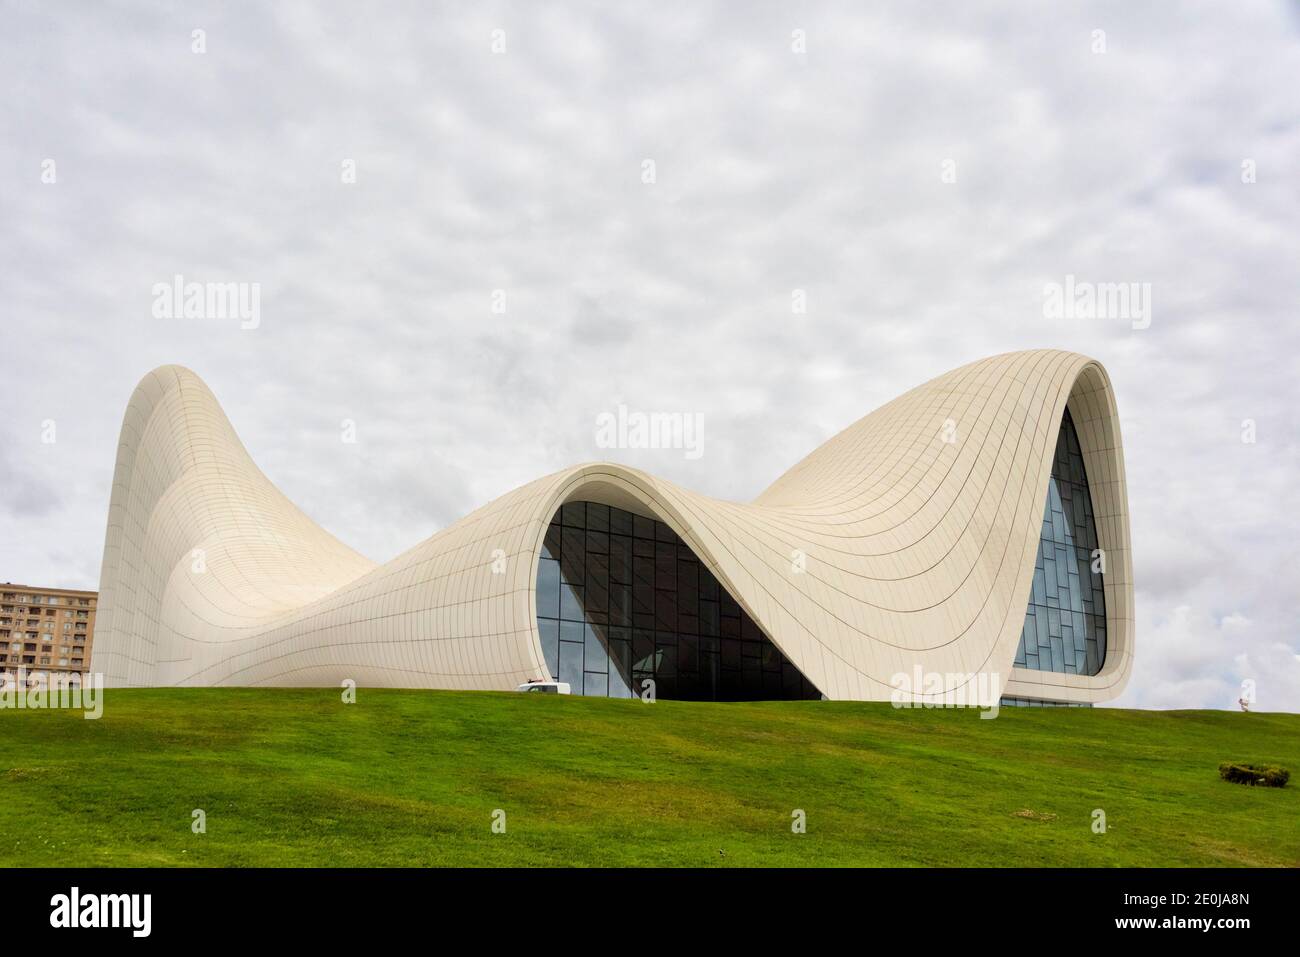 Heydar Aliyev Center designed by Iraqi-British architect Zaha Haid, famous for its distinctive architecture and flowing, curved style that avoids shar Stock Photo